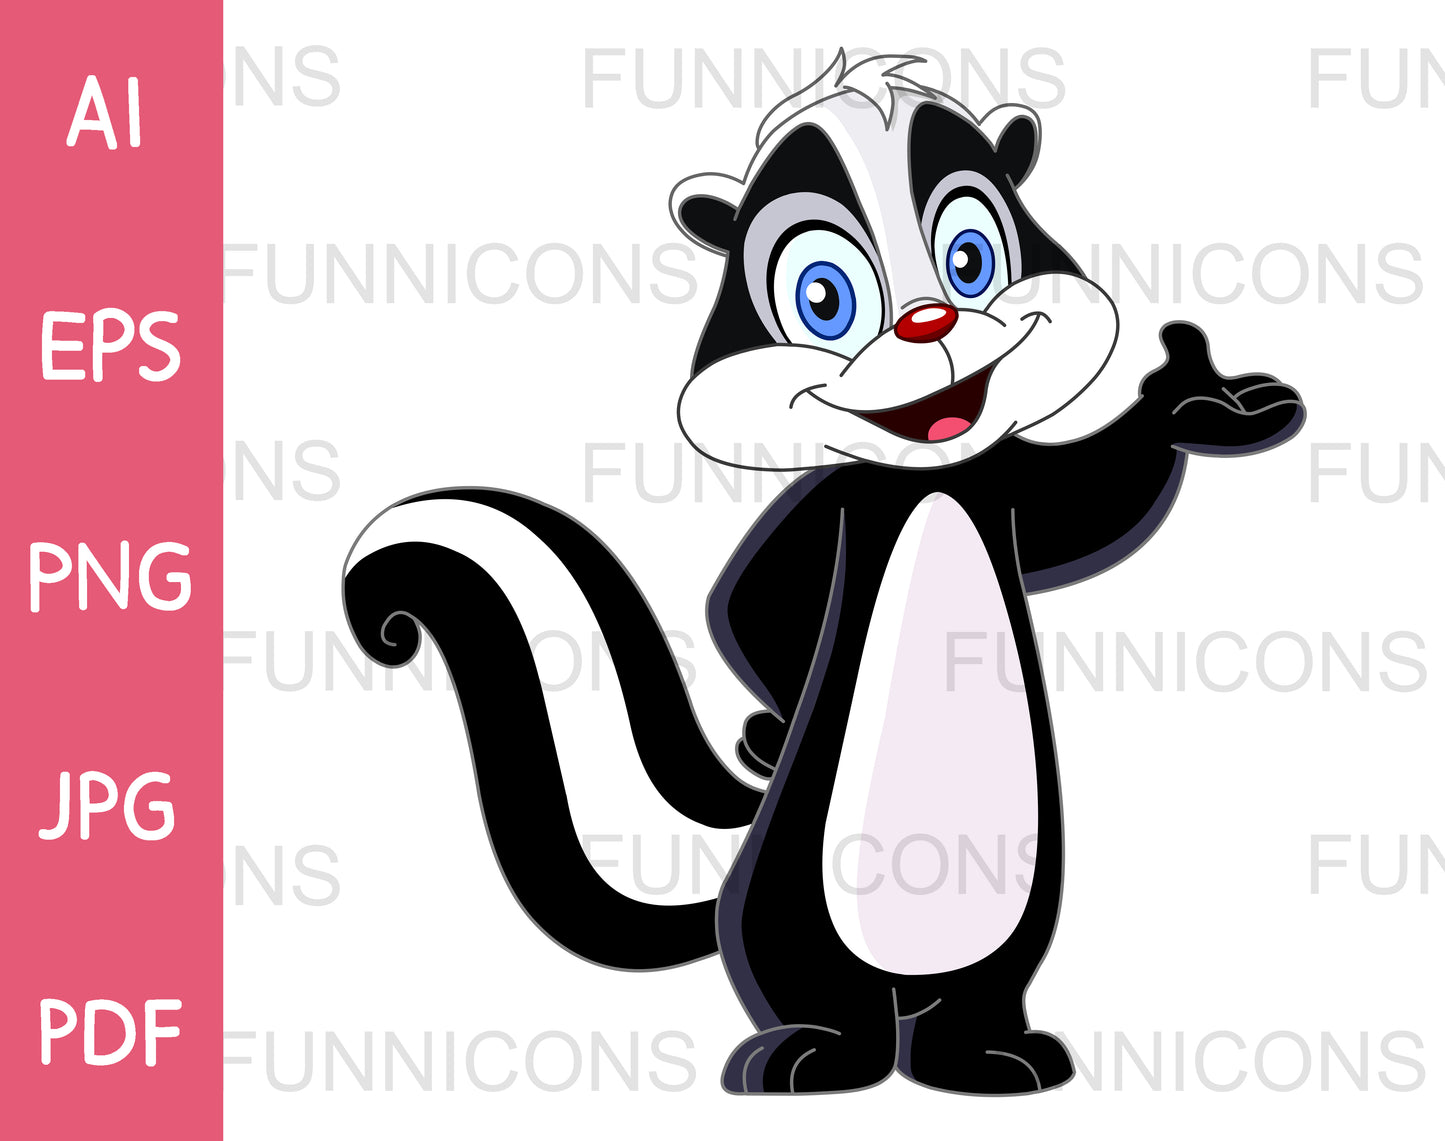 Cute Skunk Standing on his Hind Legs and Presenting with his Hand